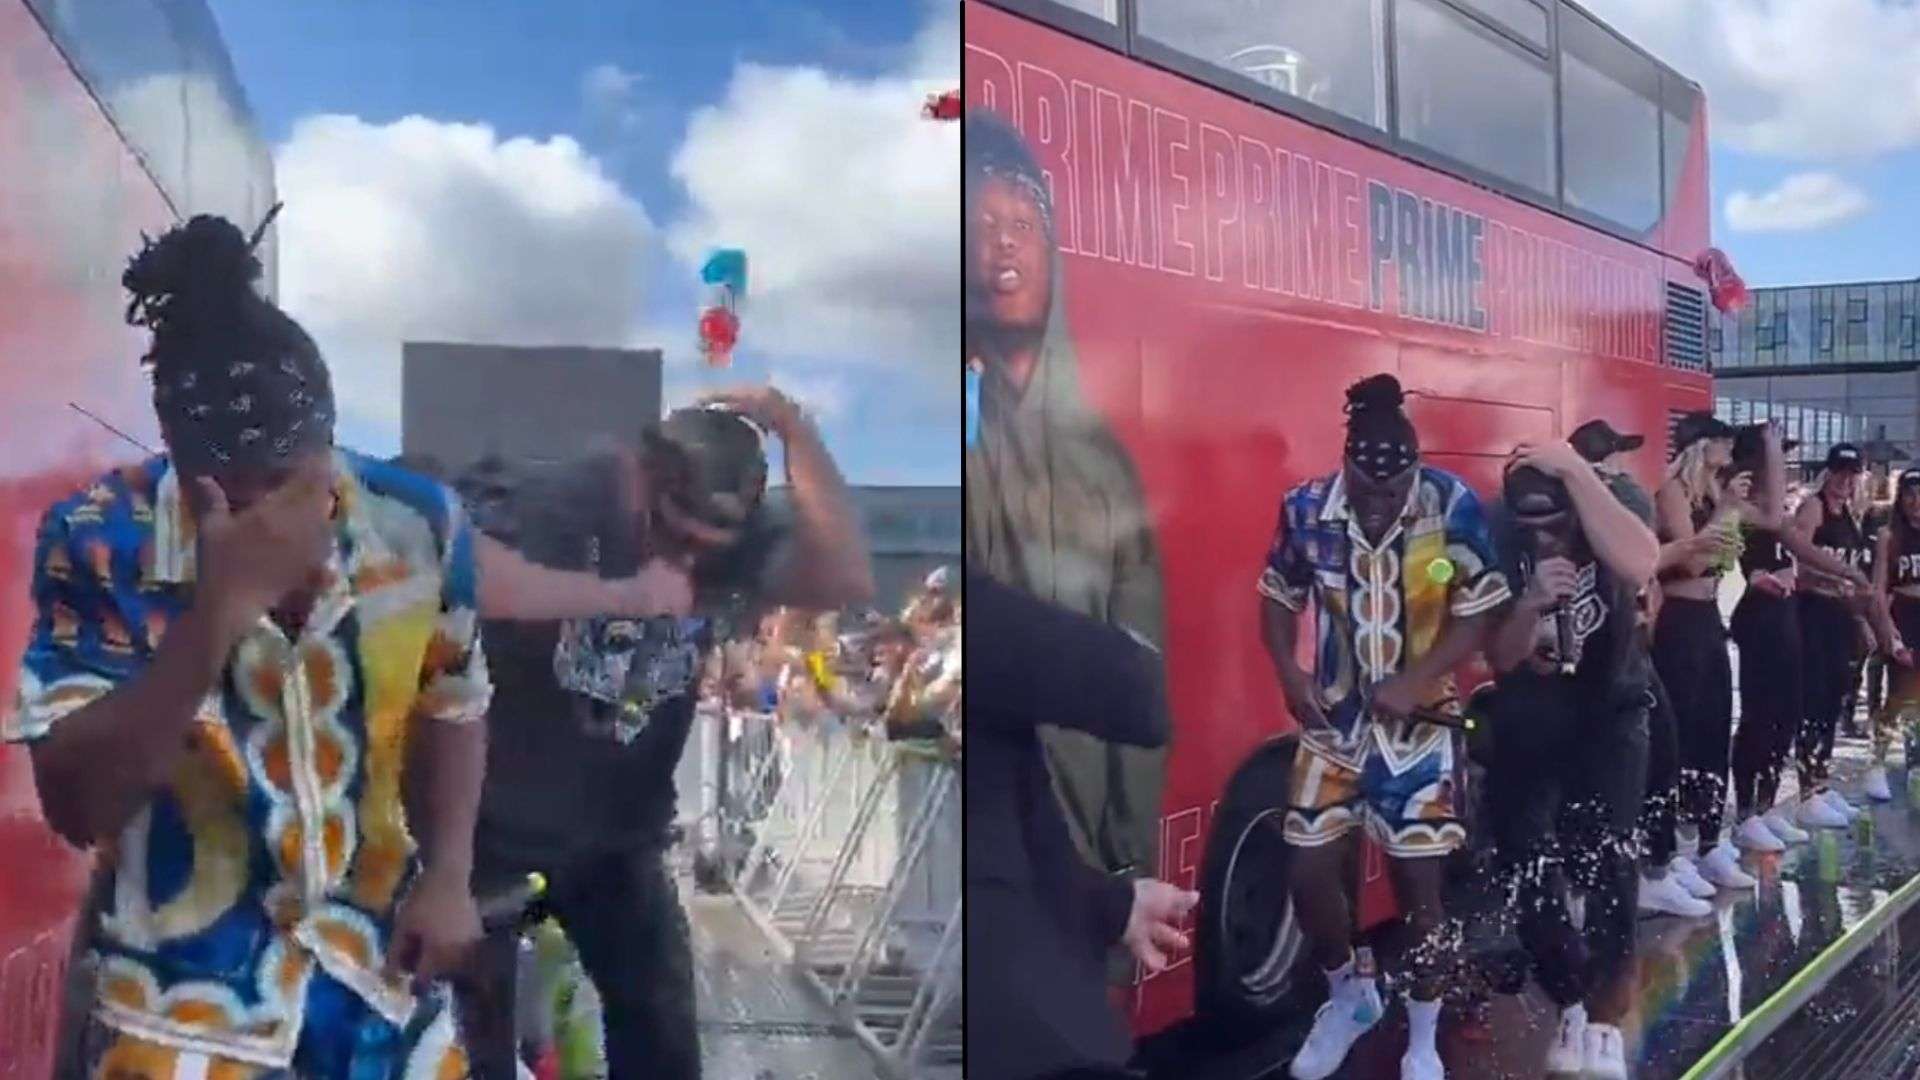 KSI and Logan Paul ducking from Prime bottles being thrown at them